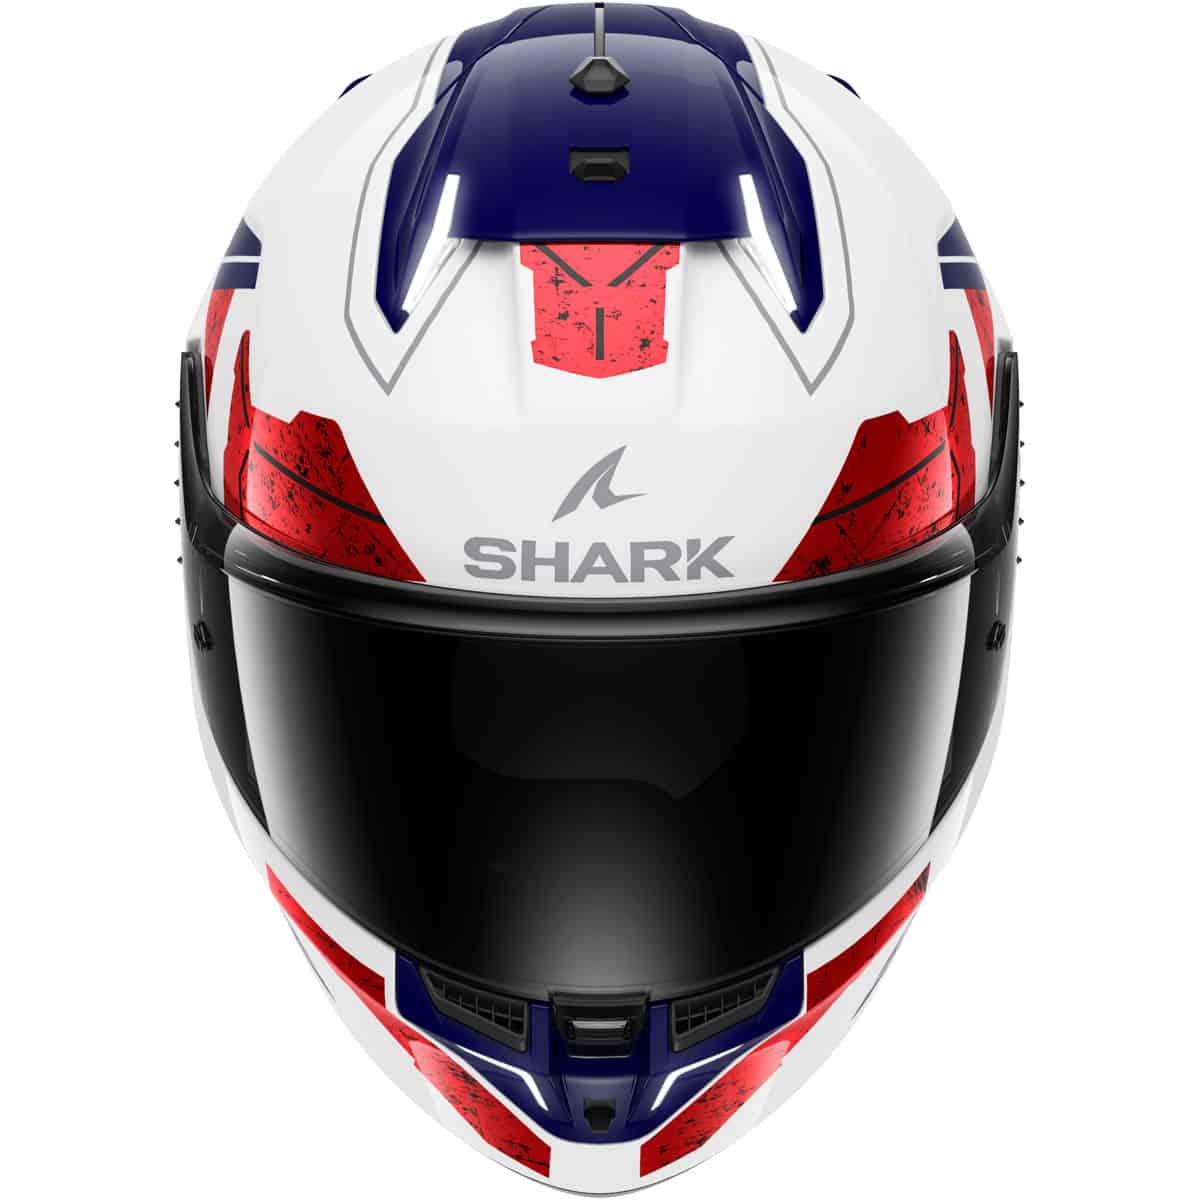 The Shark Skwal i3 helmet is the world's 1st helmet with integrated brake lights. This advanced full-face helmet from Shark components LED lighting with an integrated accelerometer to activate the rear brake lights during braking, without having to use cables or Bluetooth! 2